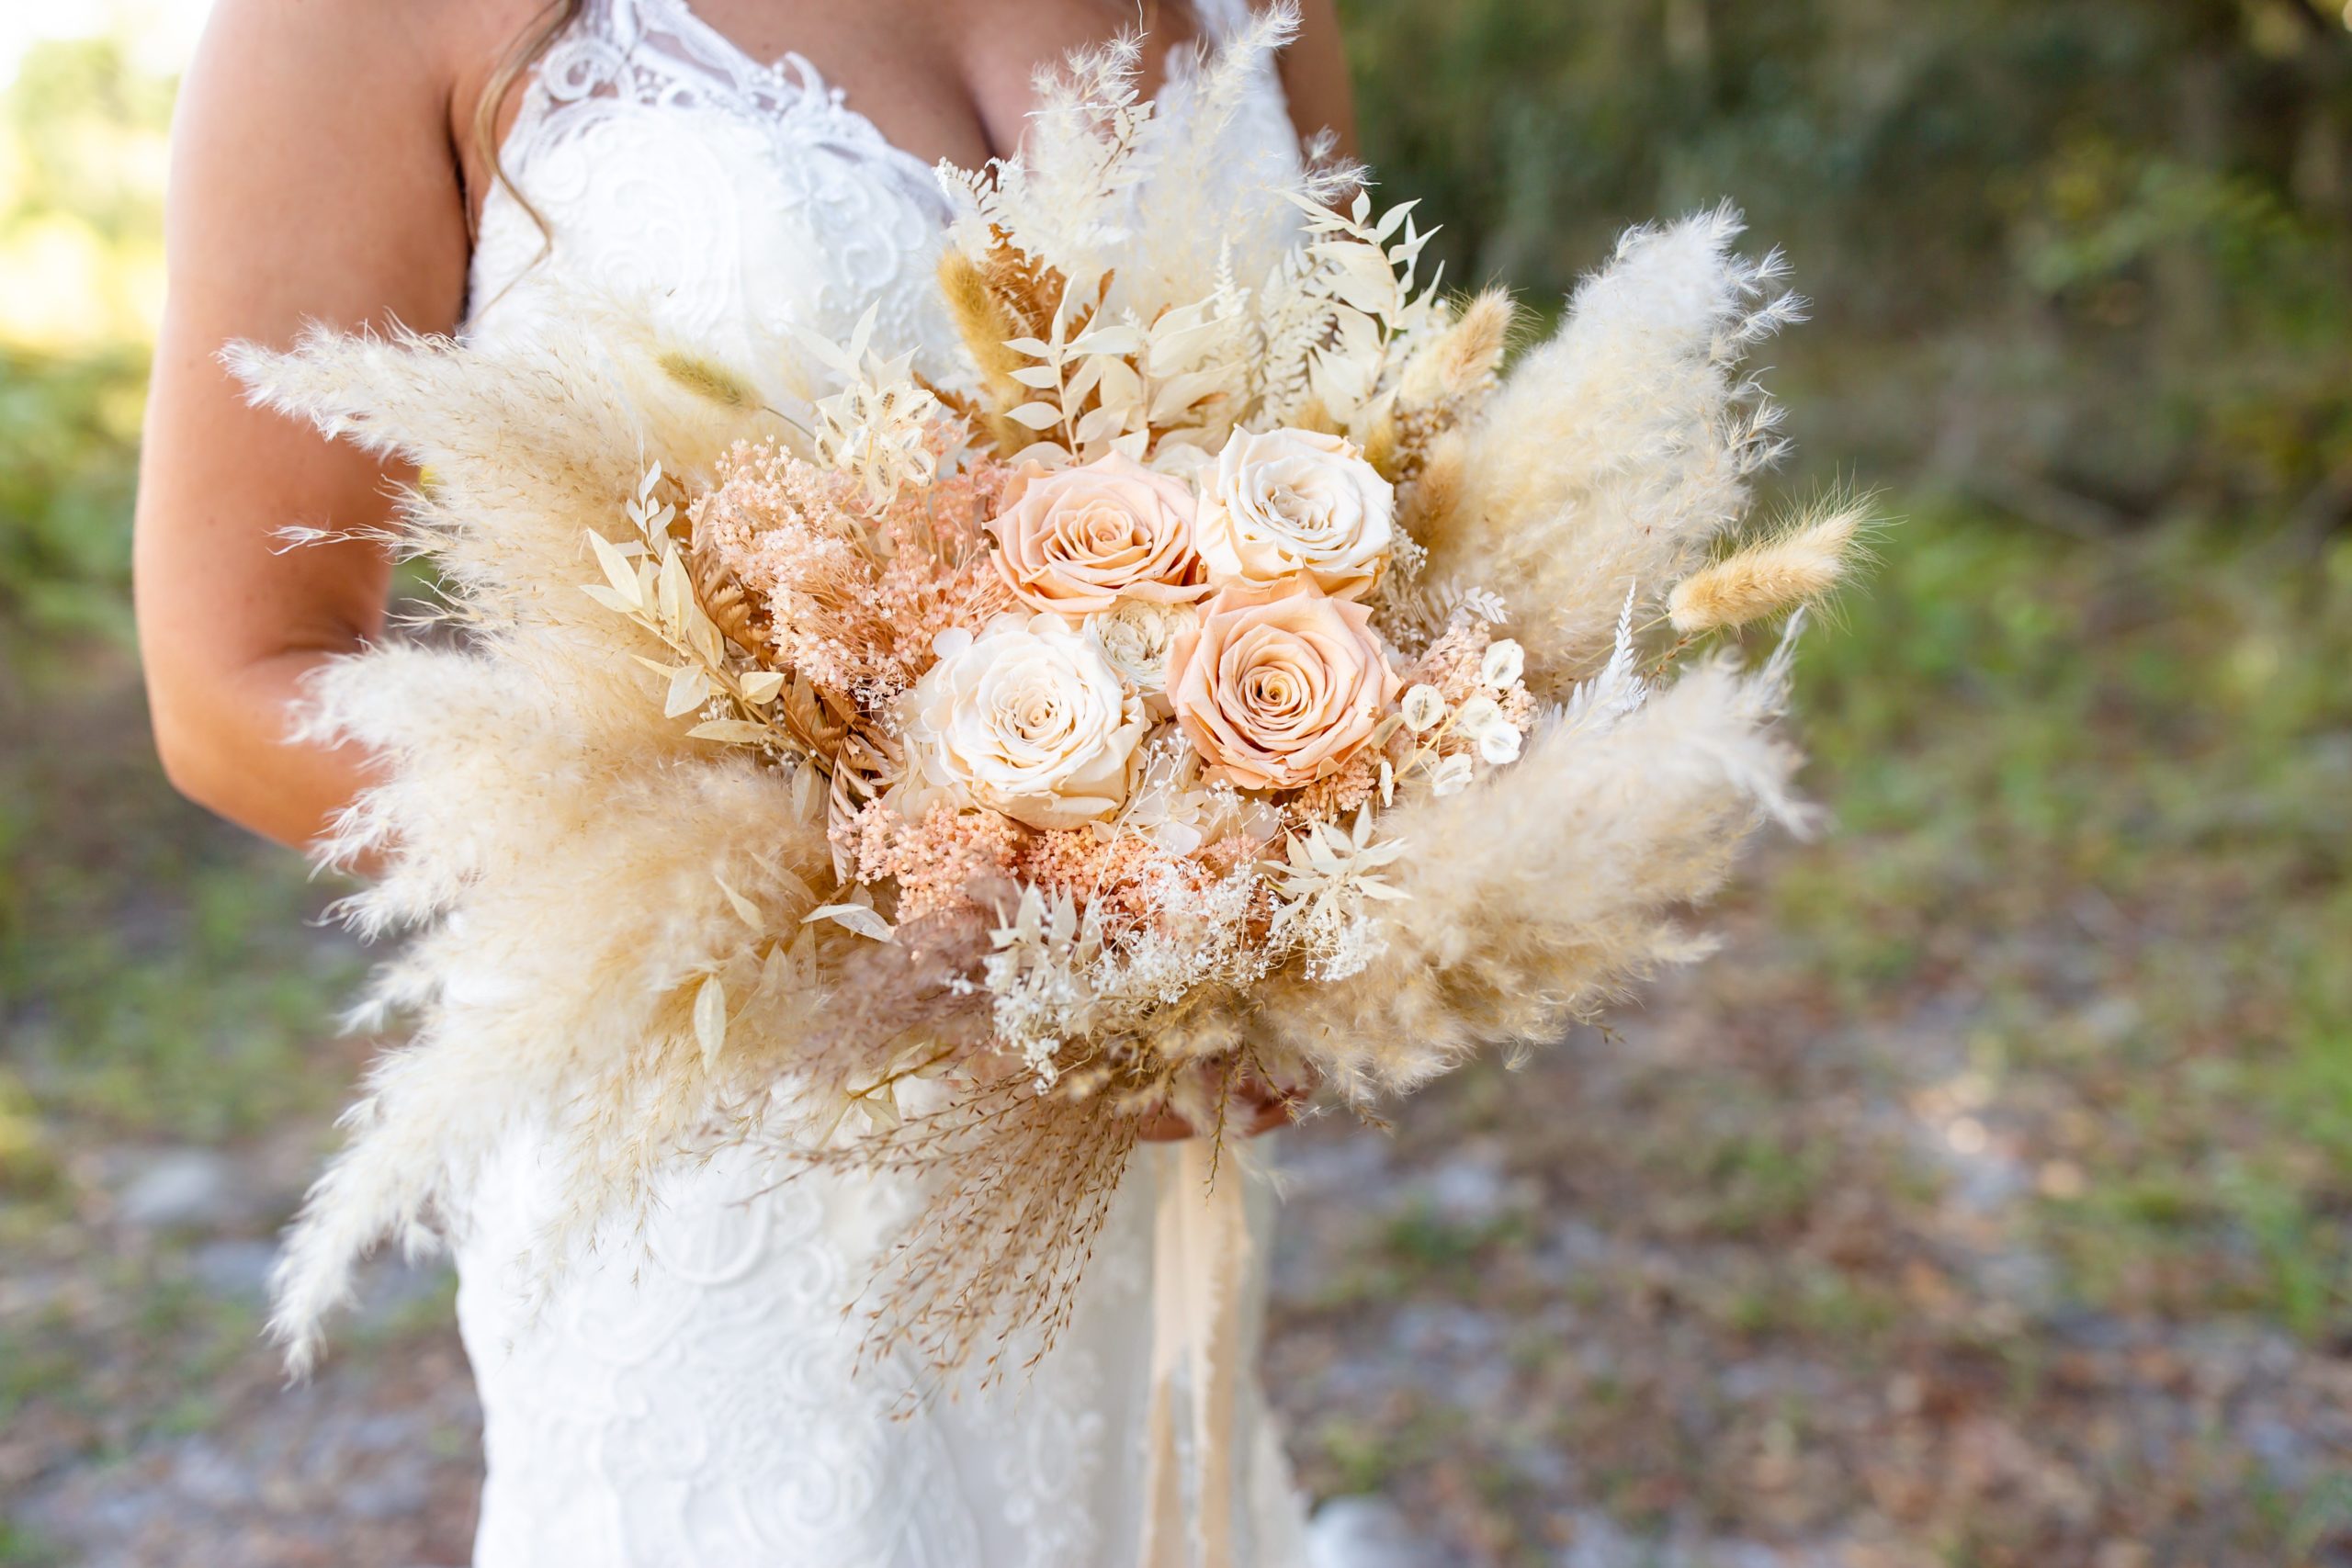 Lake Louisa Wedding Photos in Orlando, FL — Bride holding a dried floral bridal bouquet standing in field